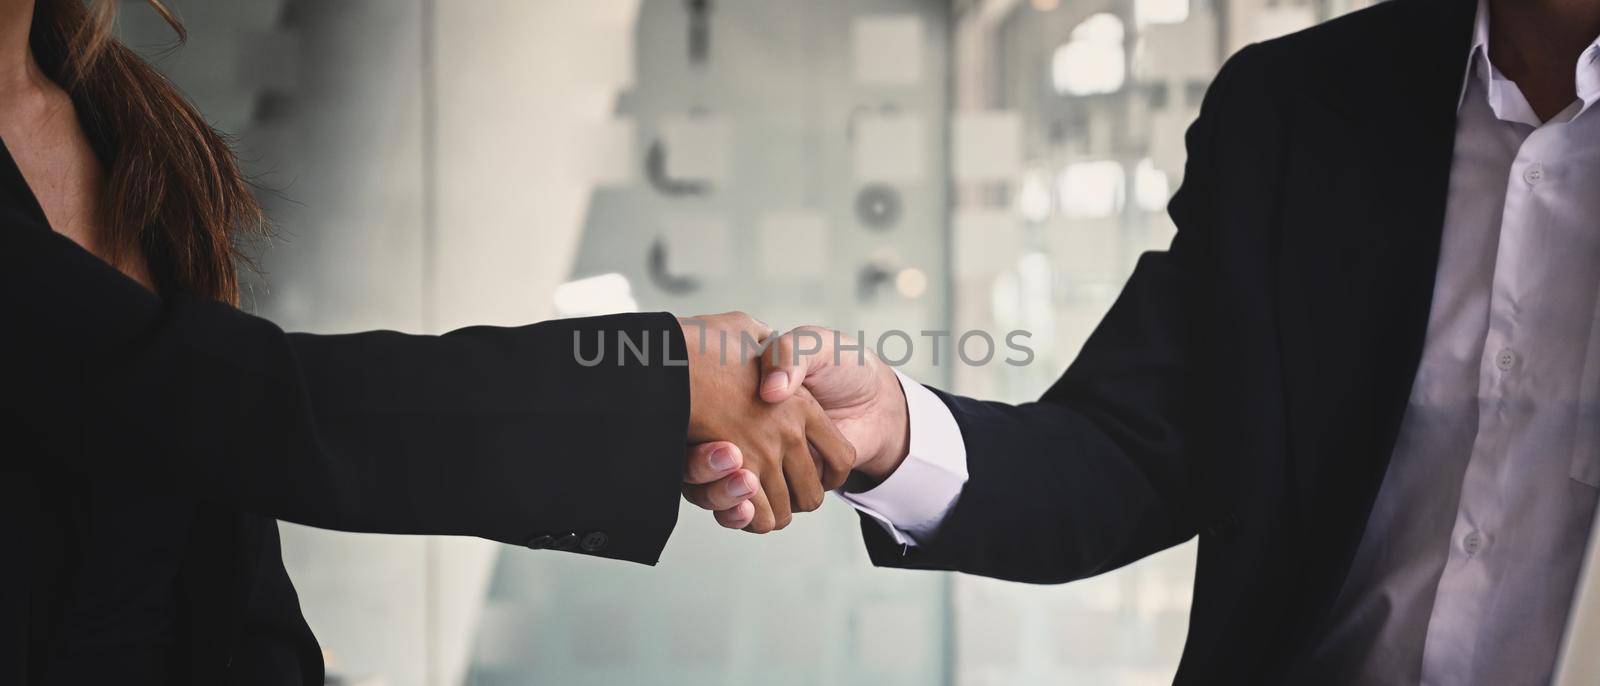 Businesspeople shaking hands after investment deal, finishing up a meeting. Teamwork and partnership concept. by prathanchorruangsak